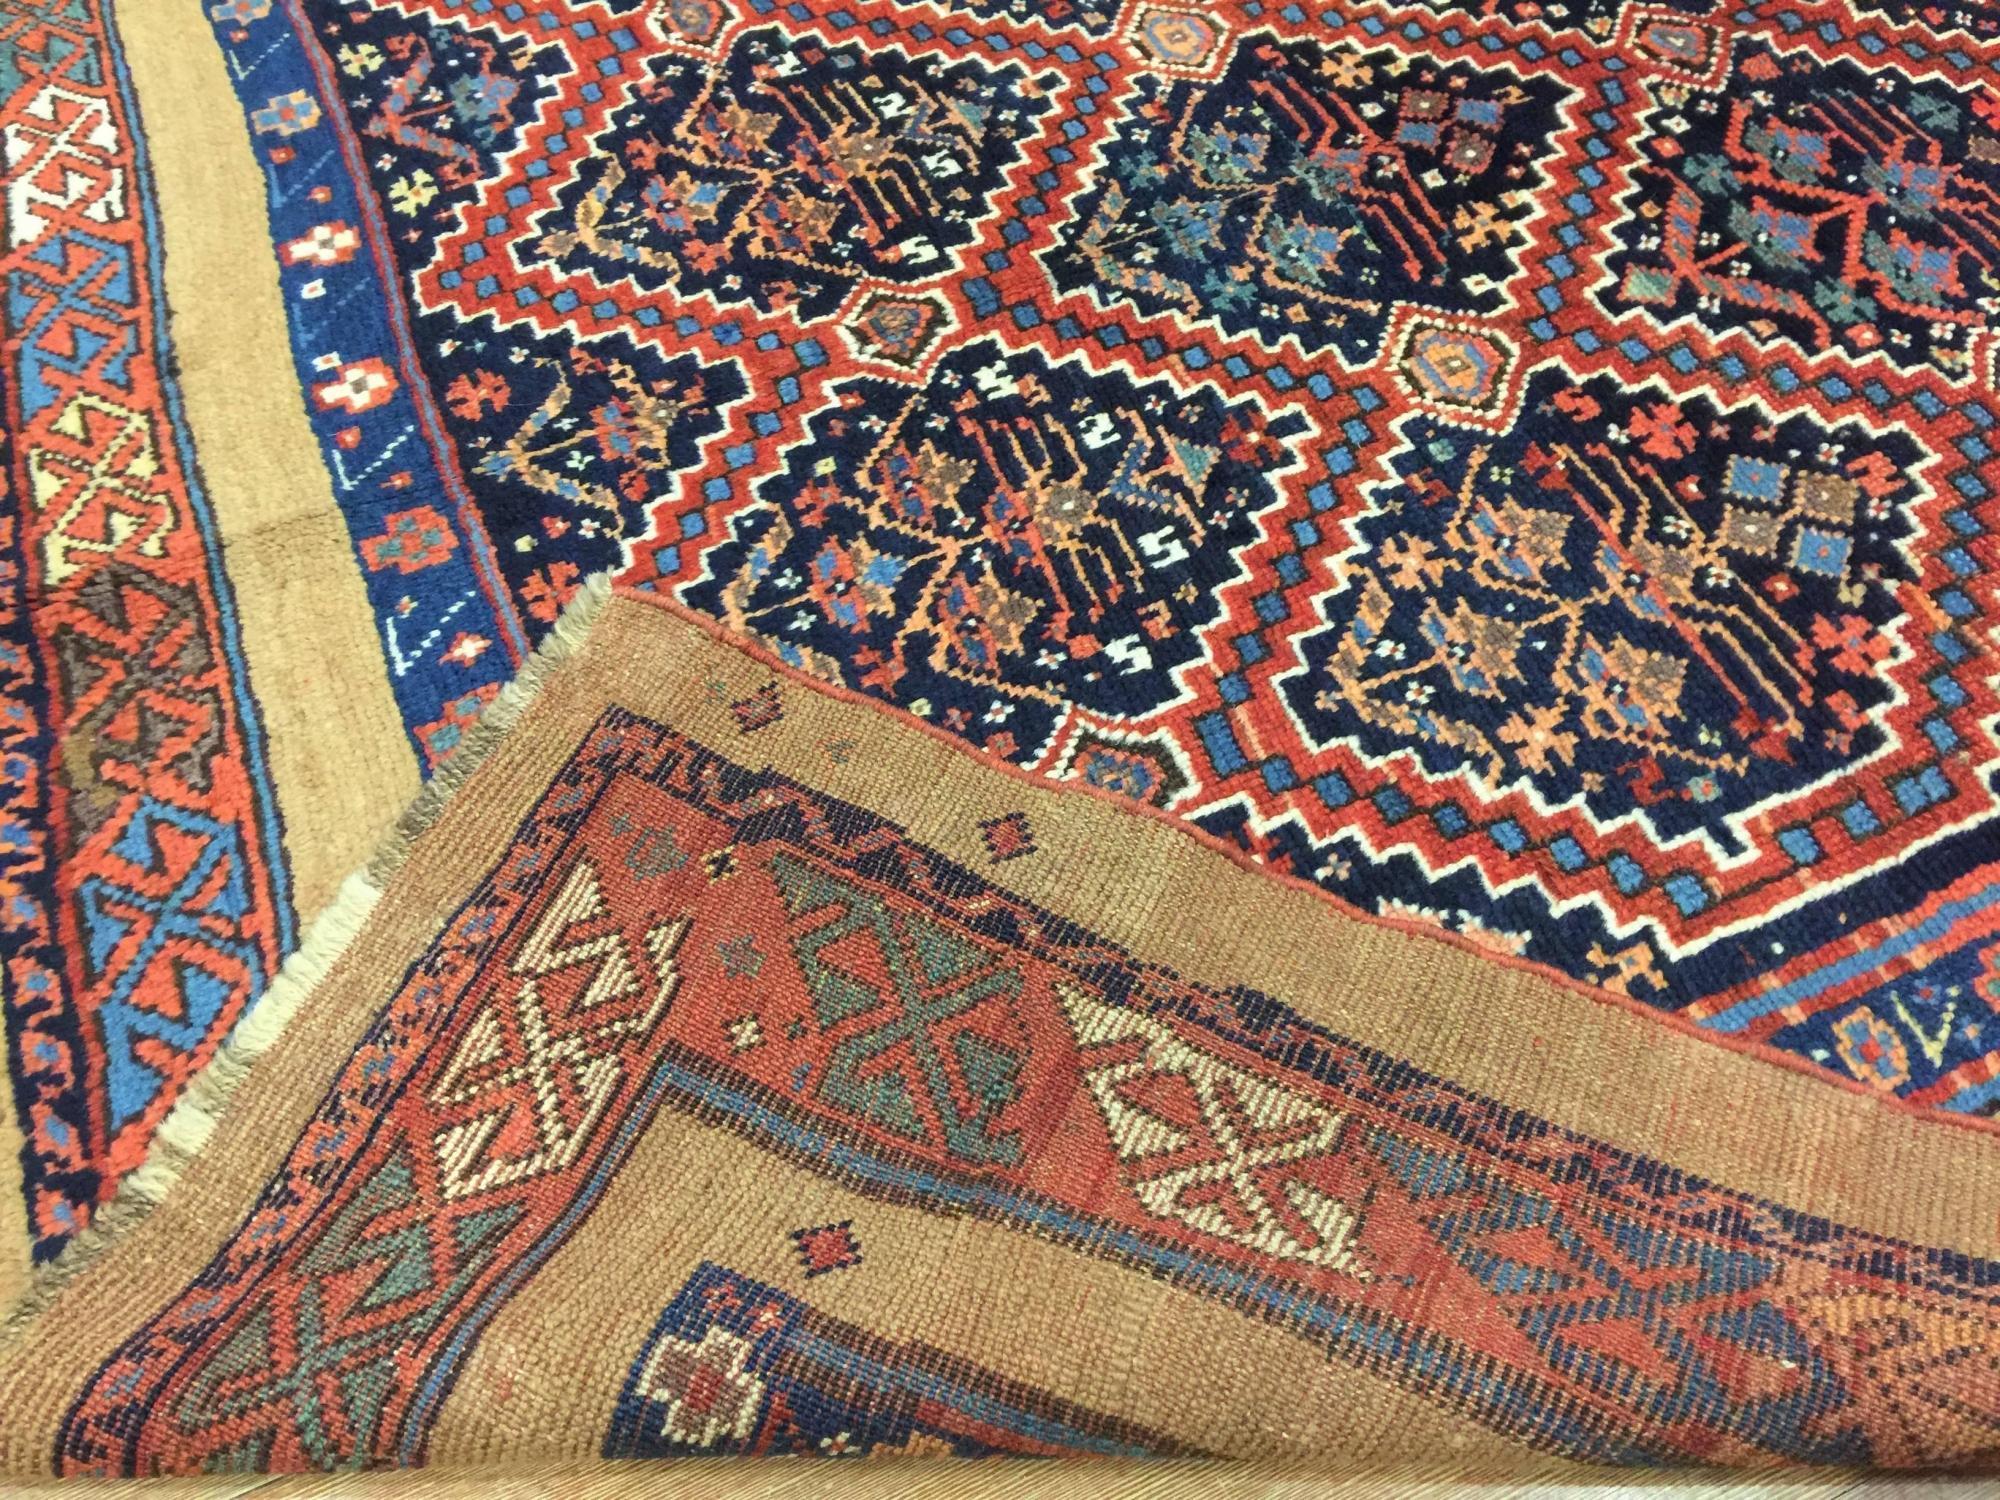 Other 4.6x11.5 Ft Antique Serab Runner, Northwest Persia, One-of-a-Kind Rug, CA 1875 For Sale